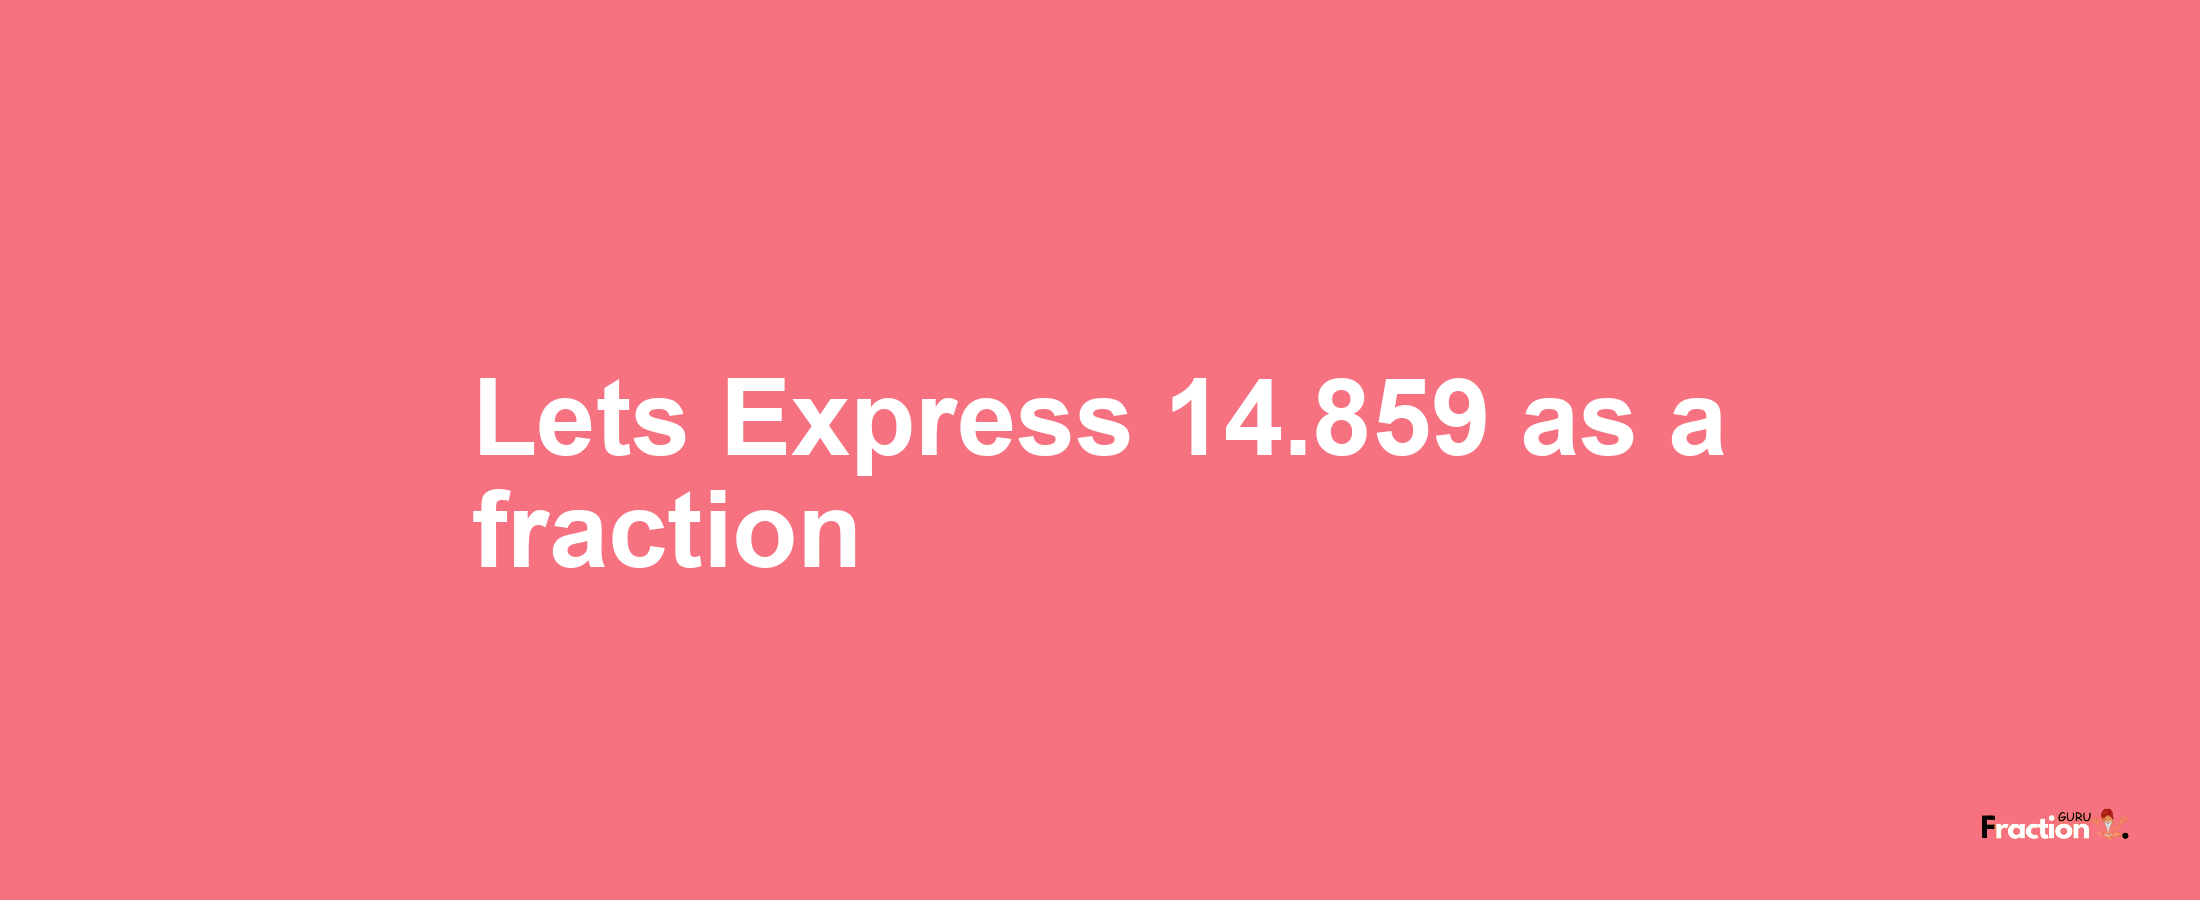 Lets Express 14.859 as afraction